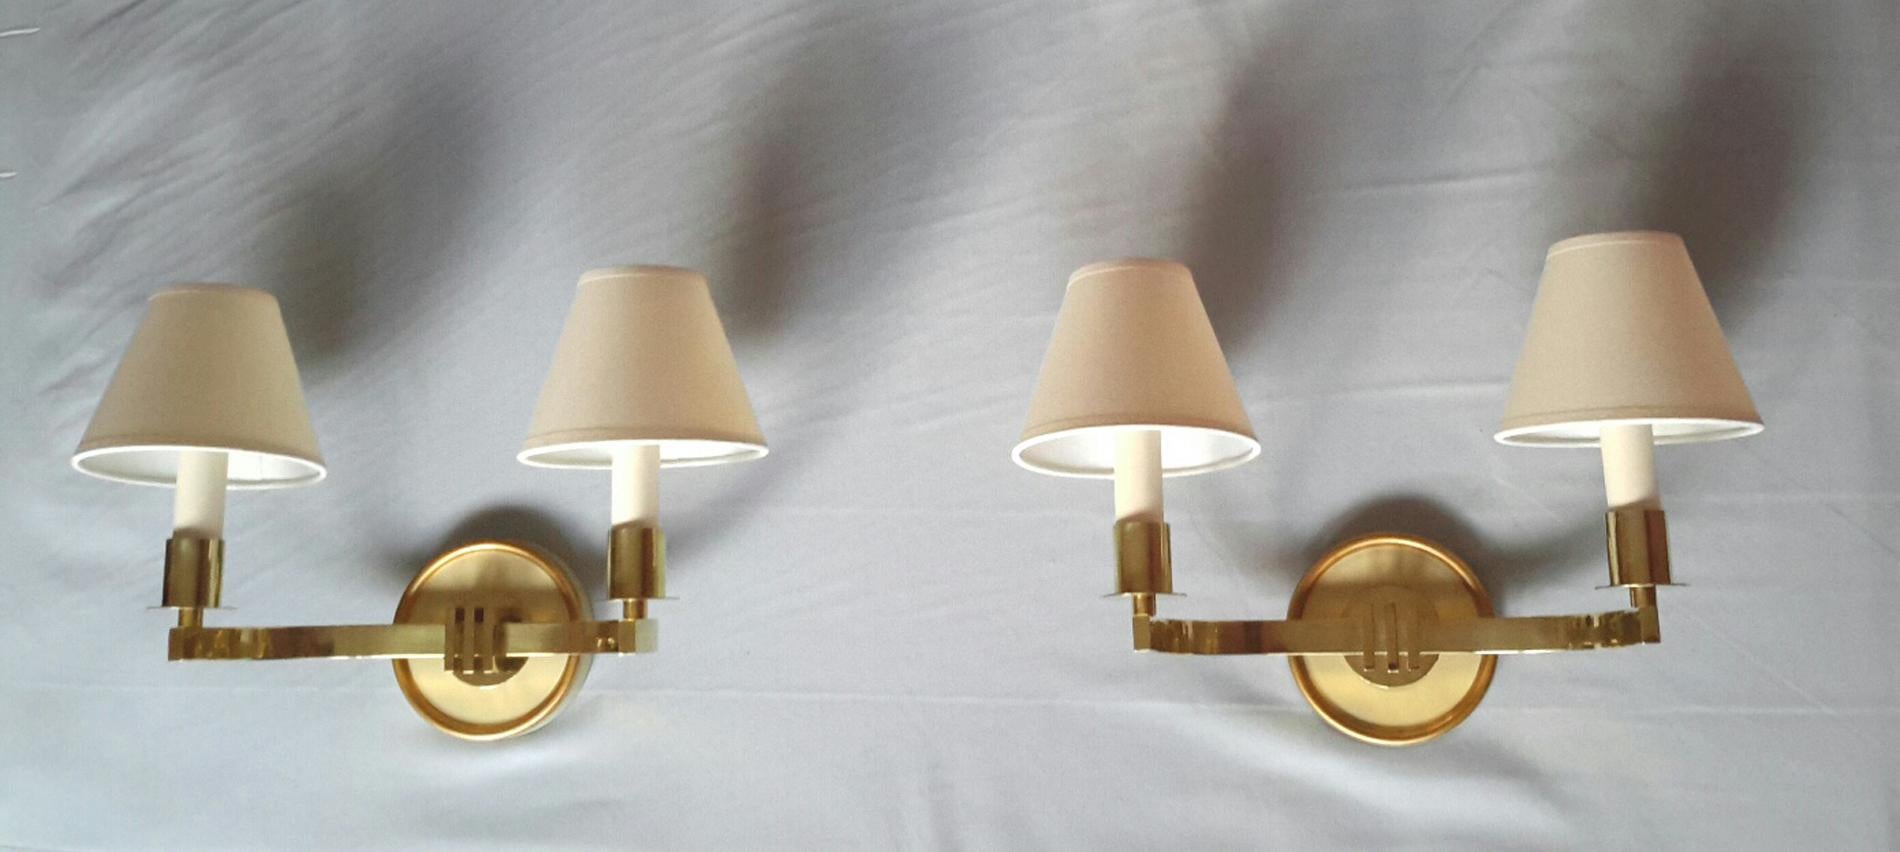 Very elegant pair of French Mid-Century Modern 2-arm (double) wall sconces from the mid-1950s, in bronze, cream white lacquered metal and ivory cotton shades. The lamp shades are brand new. The electrical part has been newly redonne and fits the